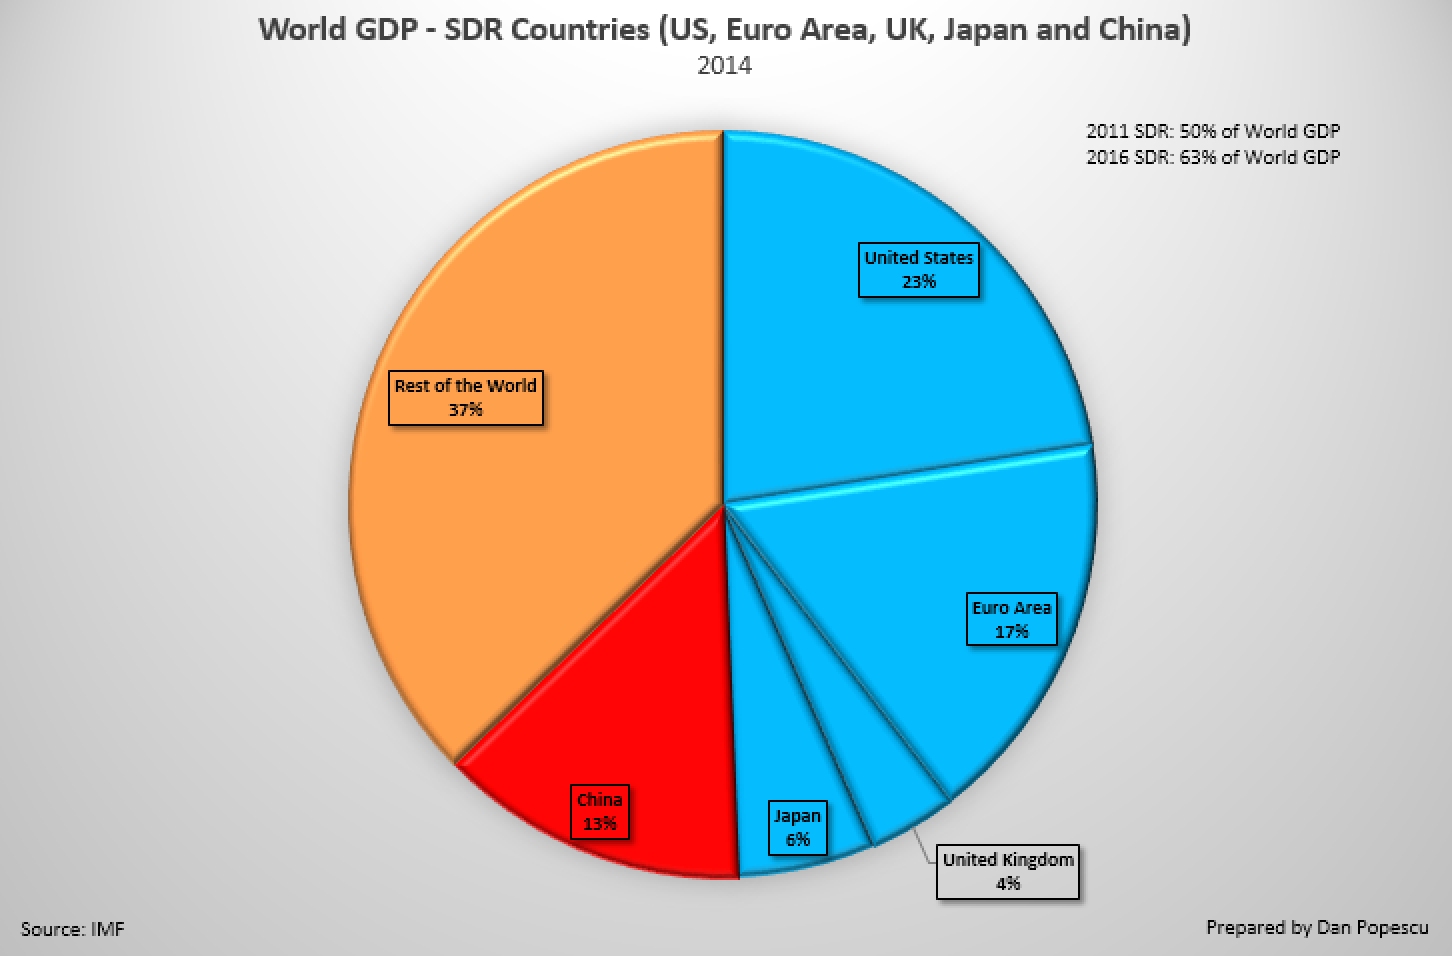 World GDP - SDR Countries 